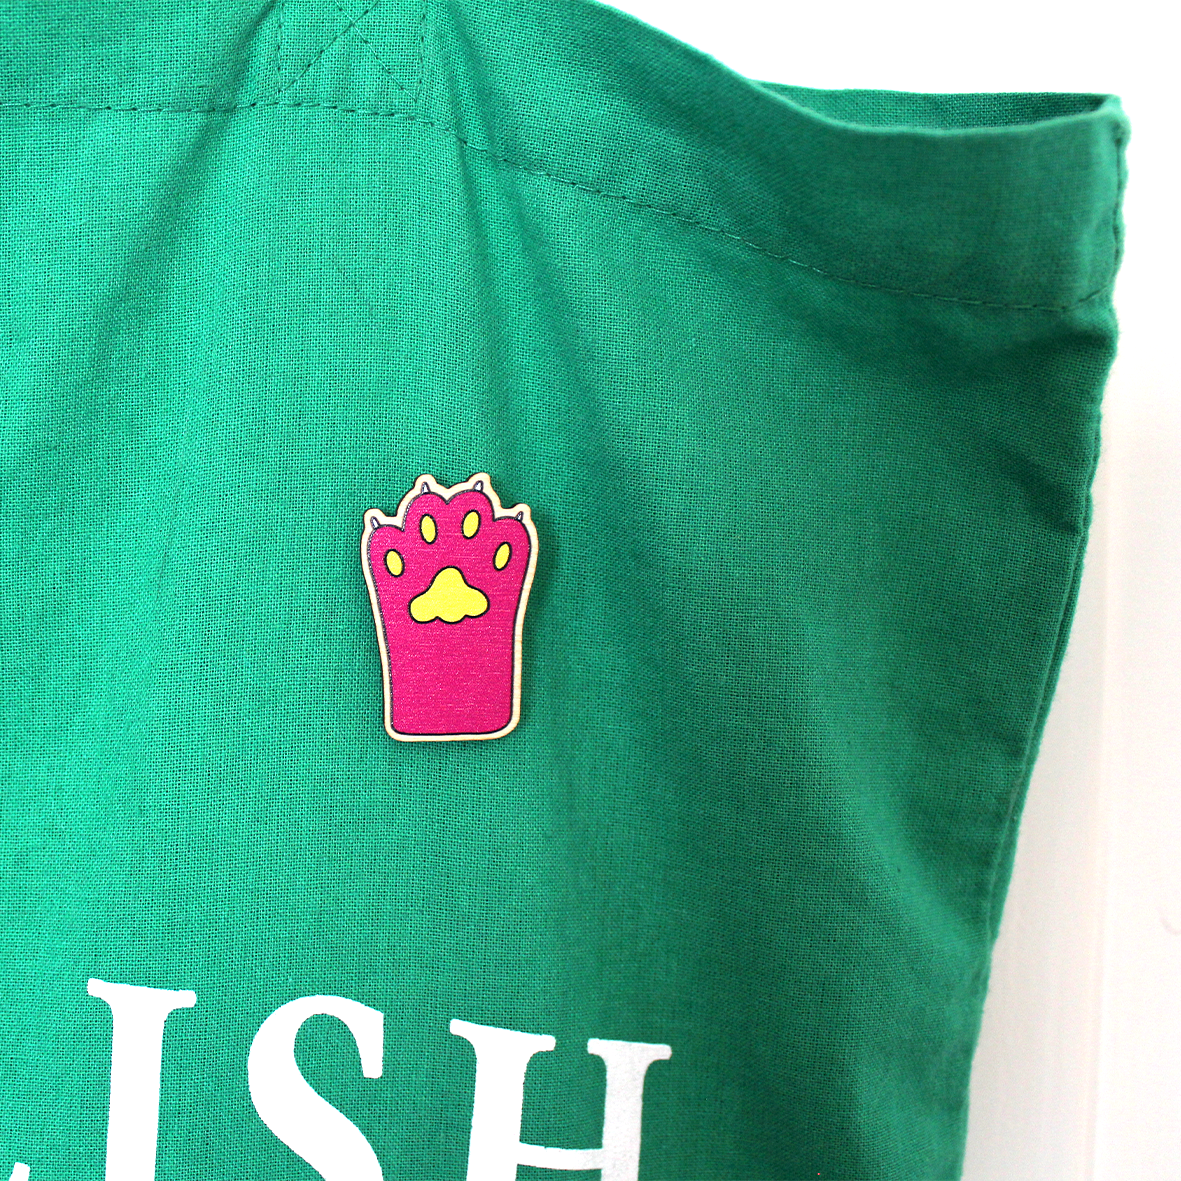 A close up of the pink paw pin badge on the green cotton tote bag